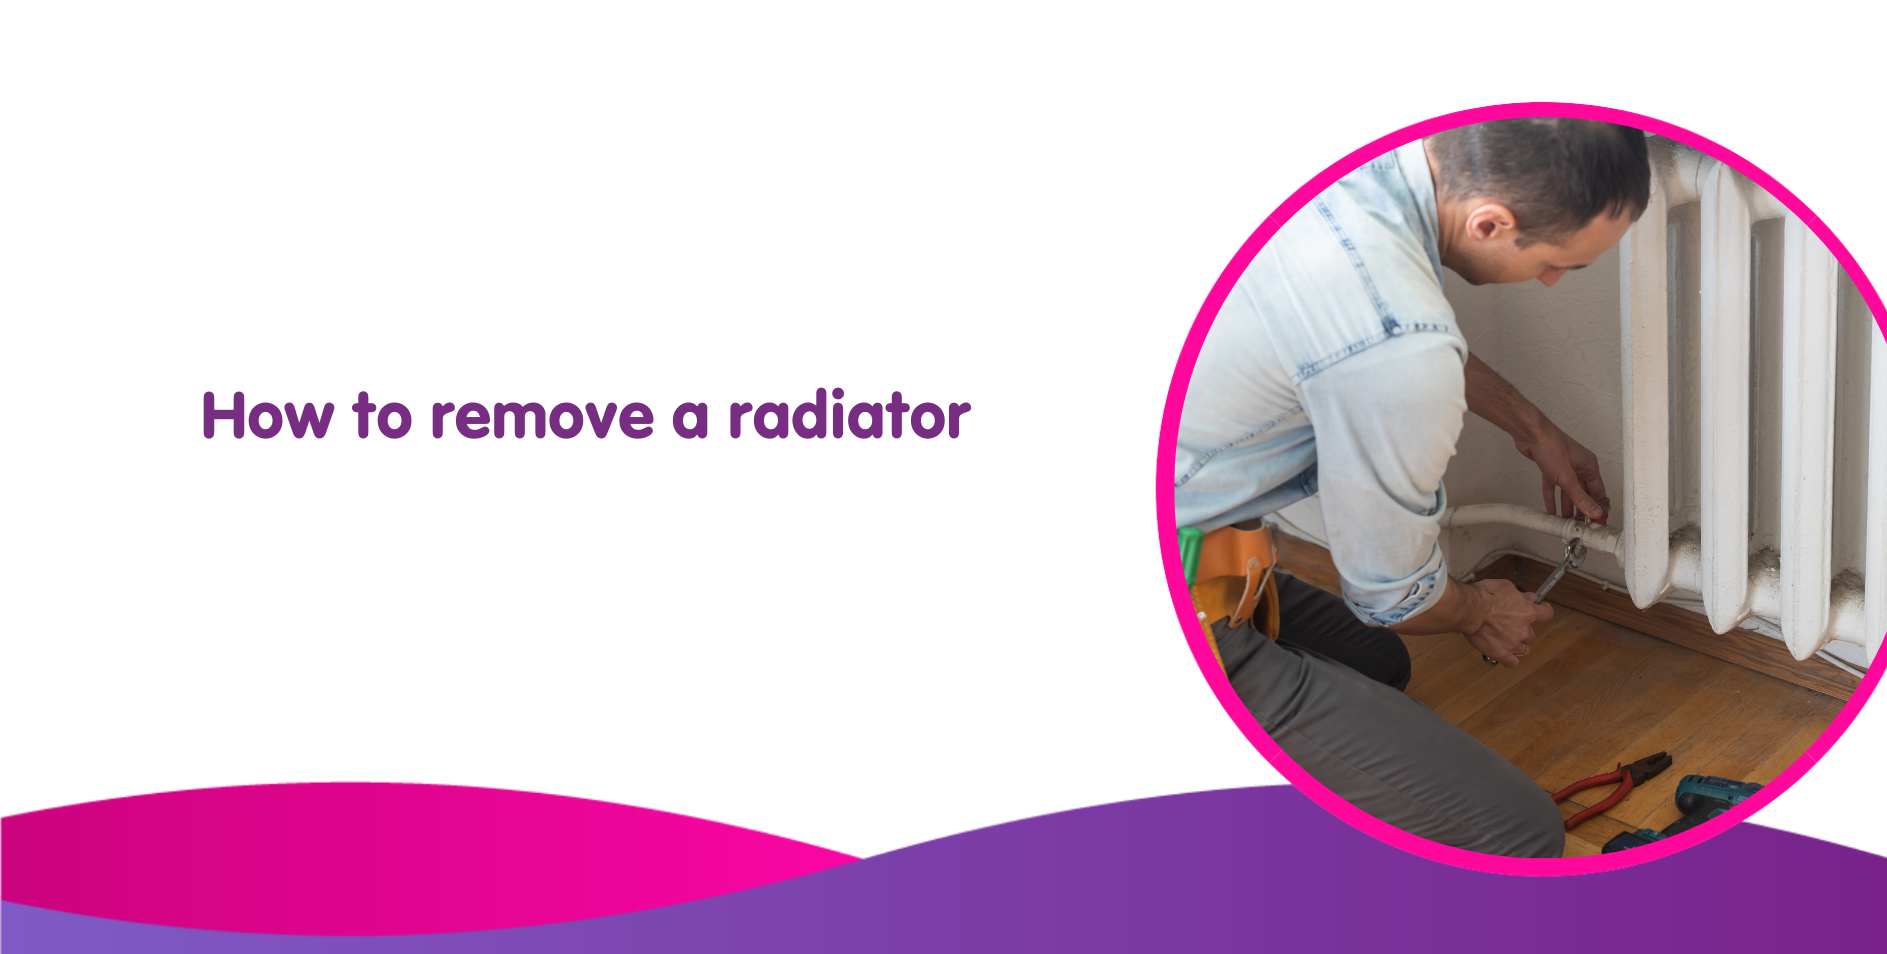 How to Remove a Radiator Quickly & Safely – Expert Tips & Guide